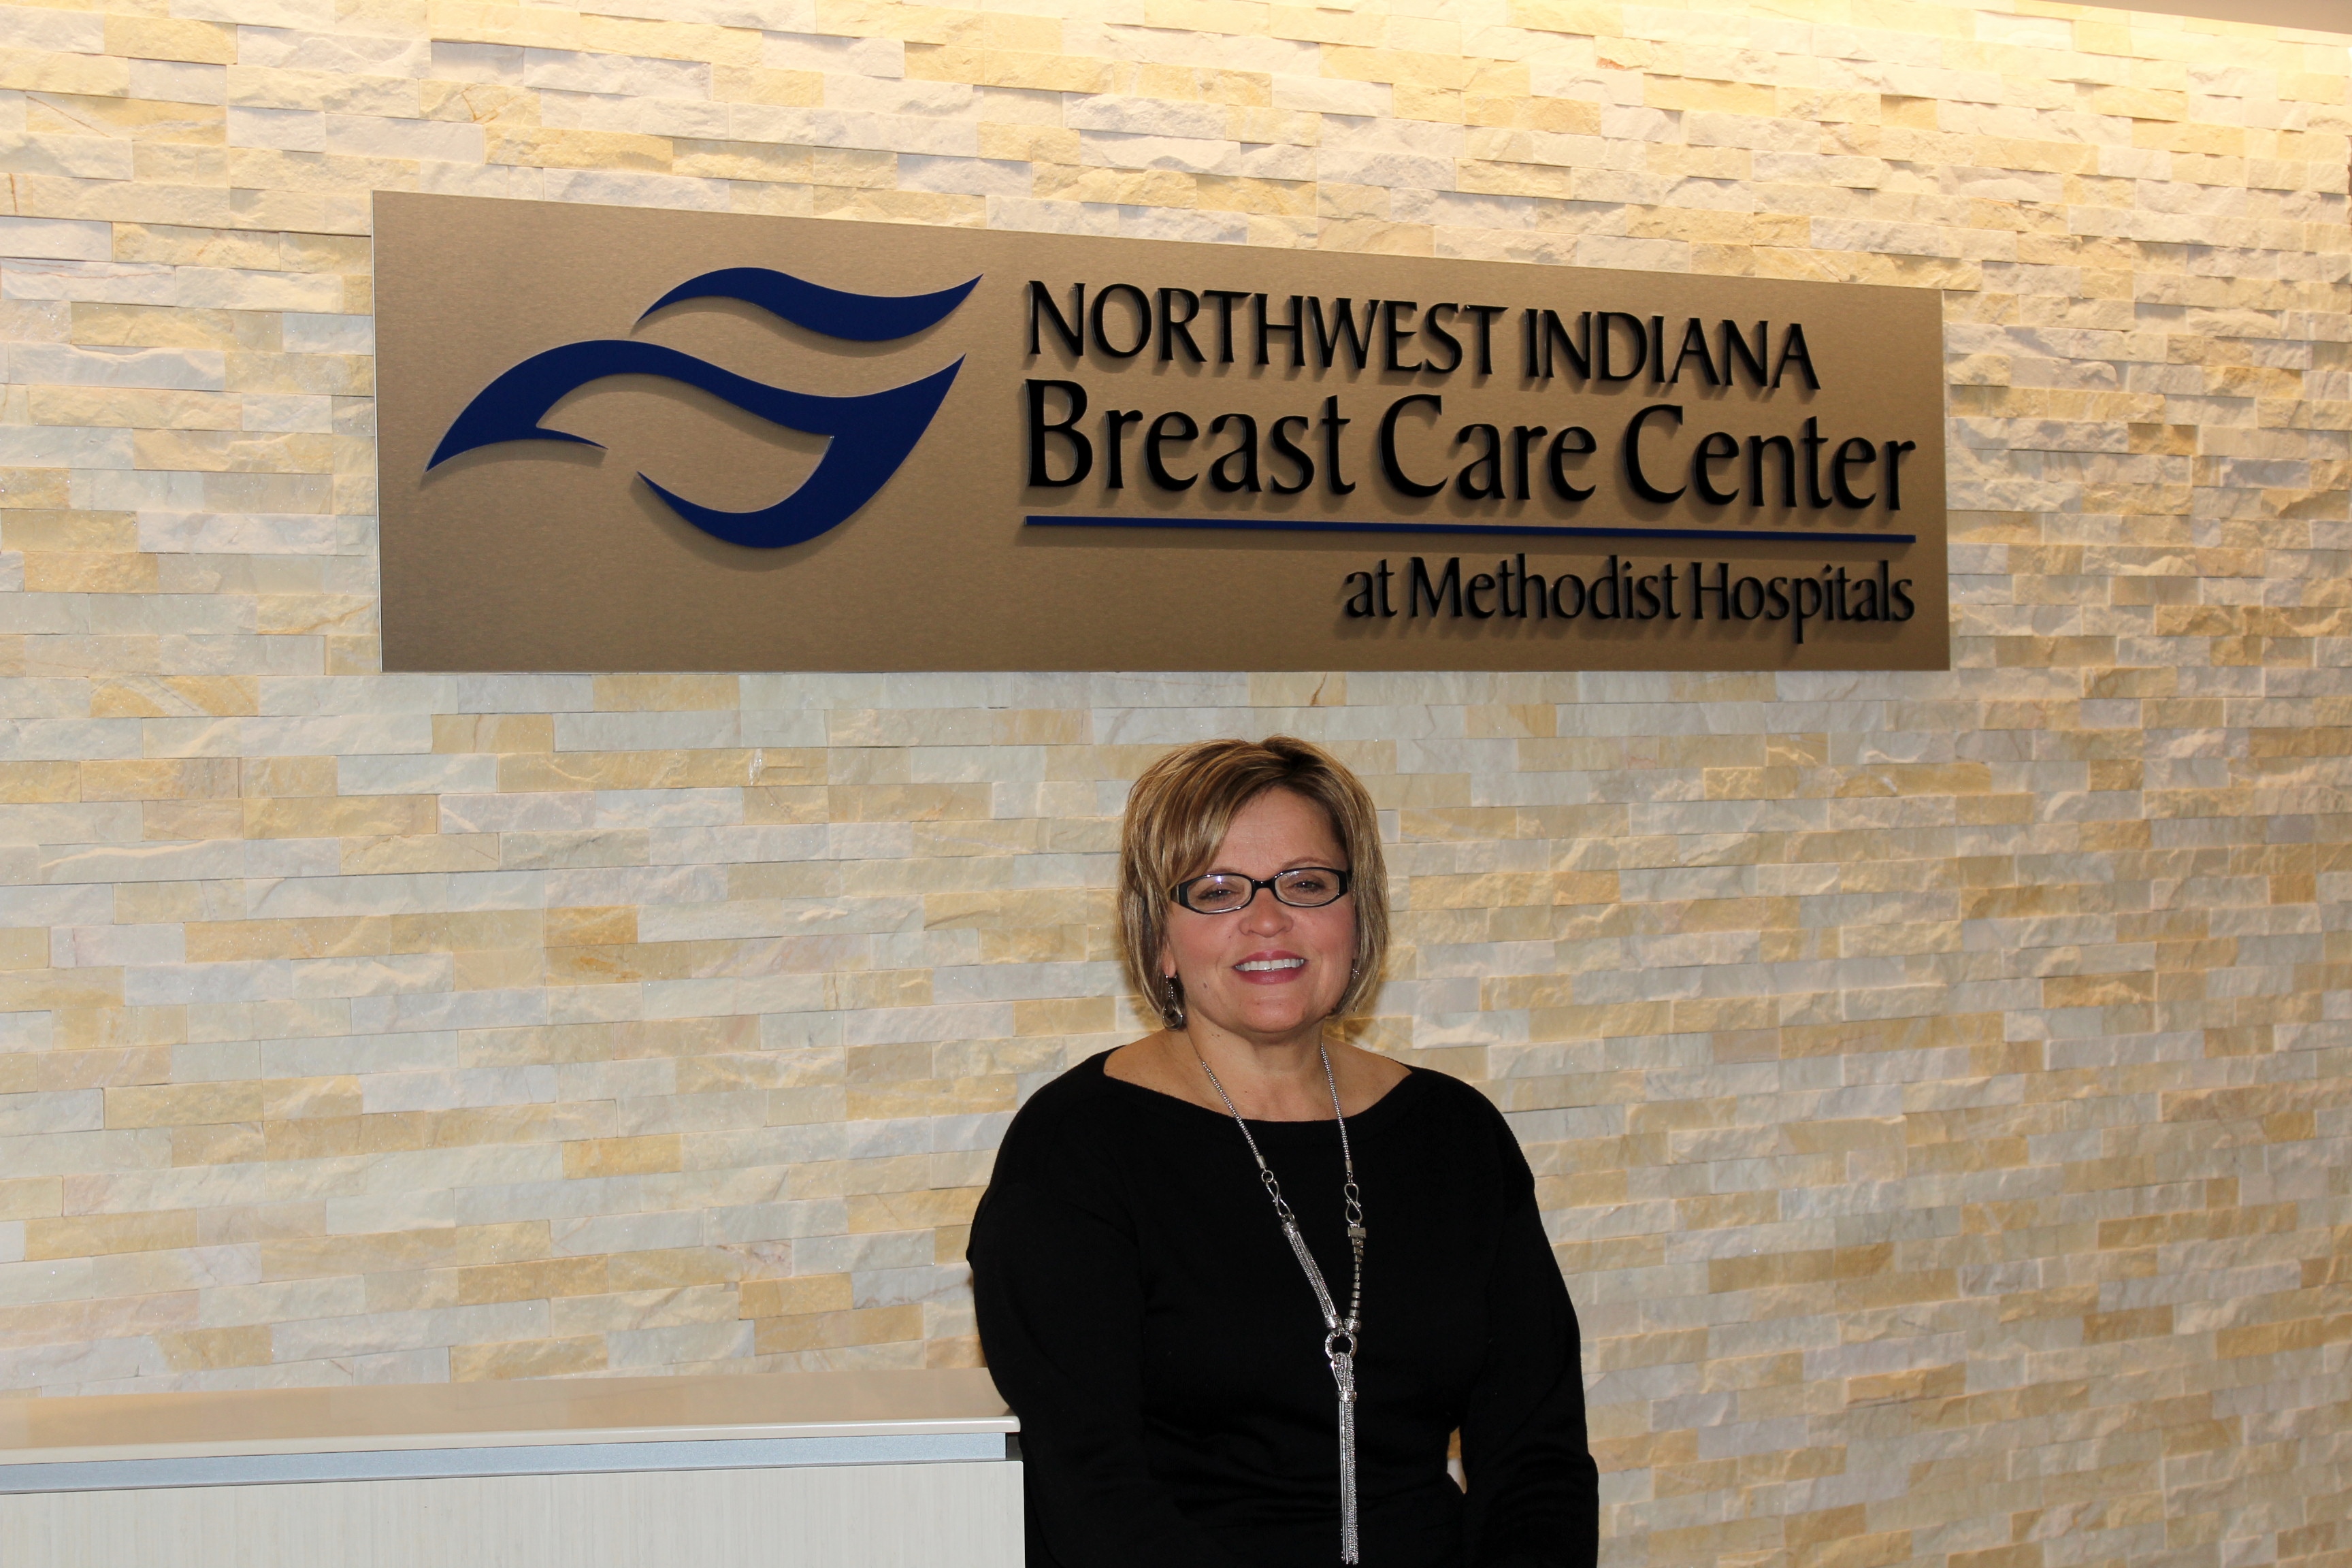 Meet Rita Rendina, Career Caregiver and Senior Mammography Technologist at the Northwest Indiana Breast Care Center at Methodist Hospital